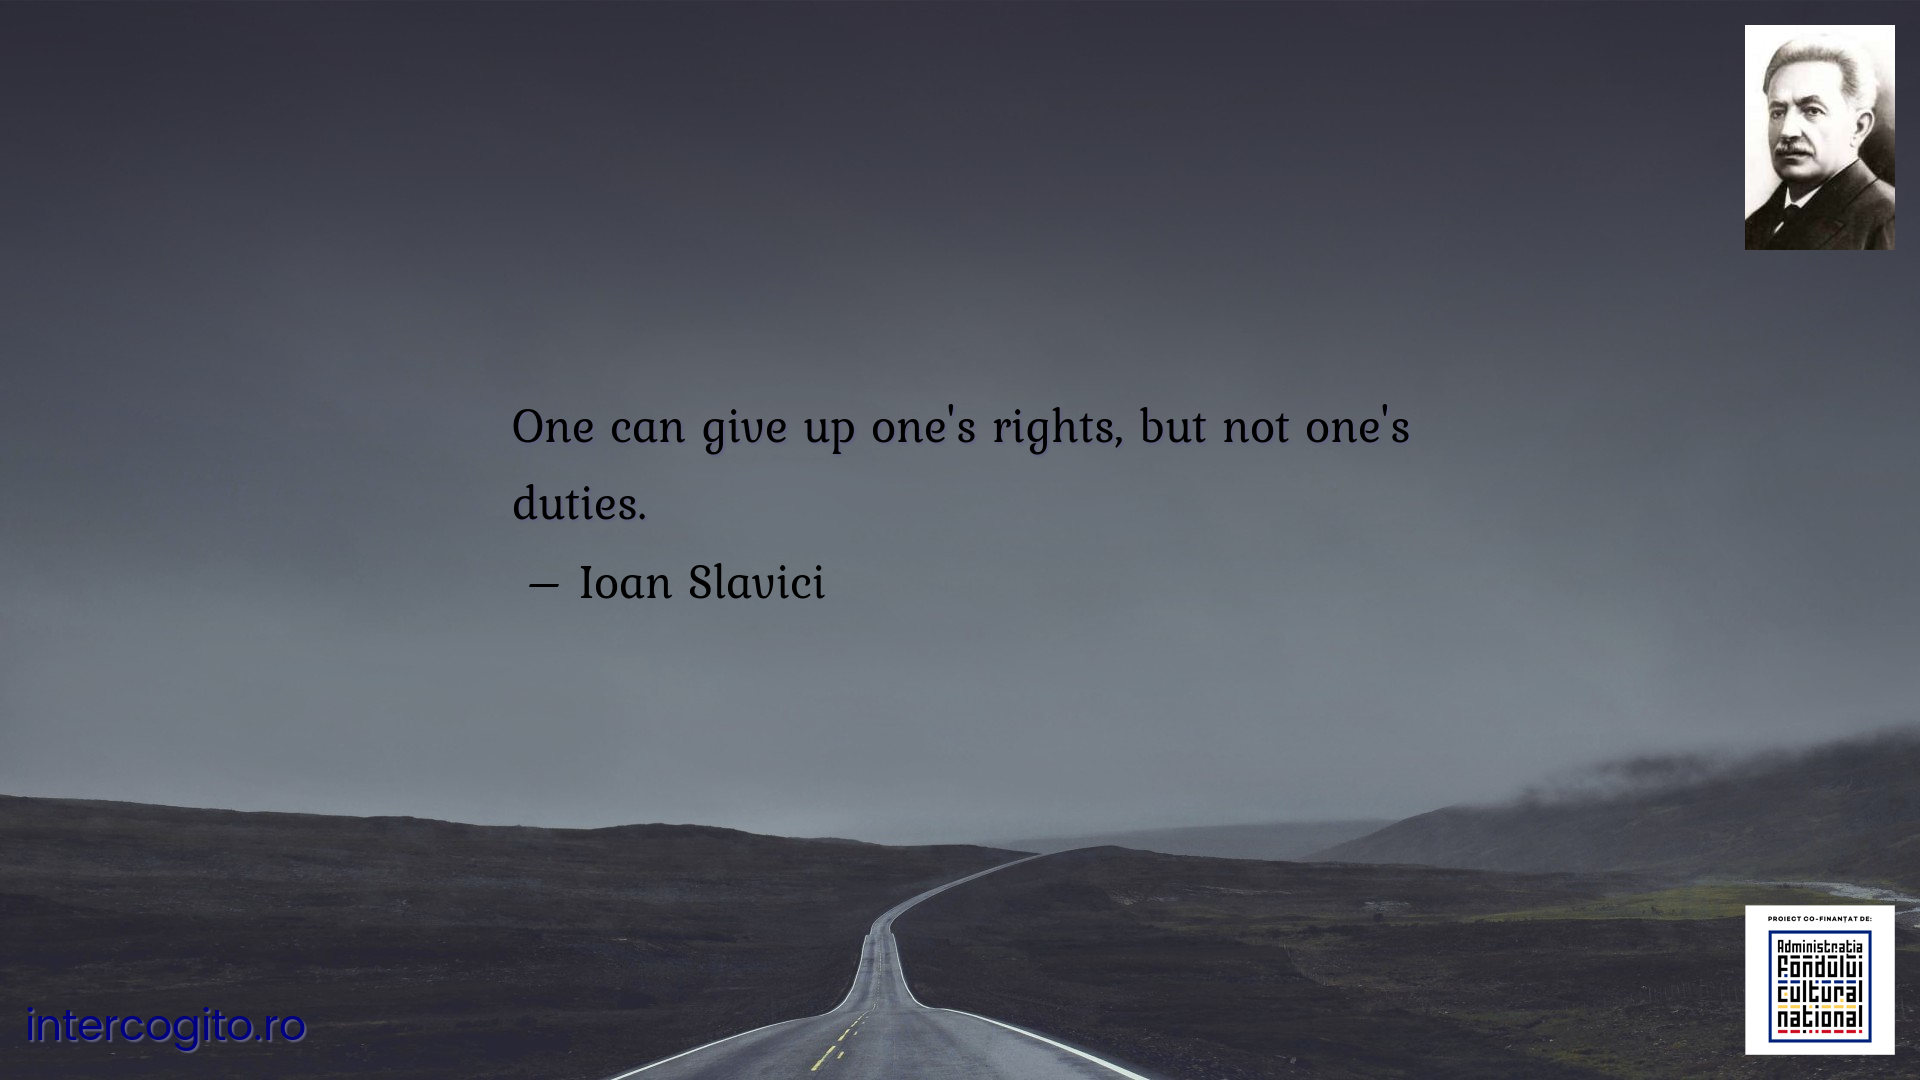 One can give up one's rights, but not one's duties.